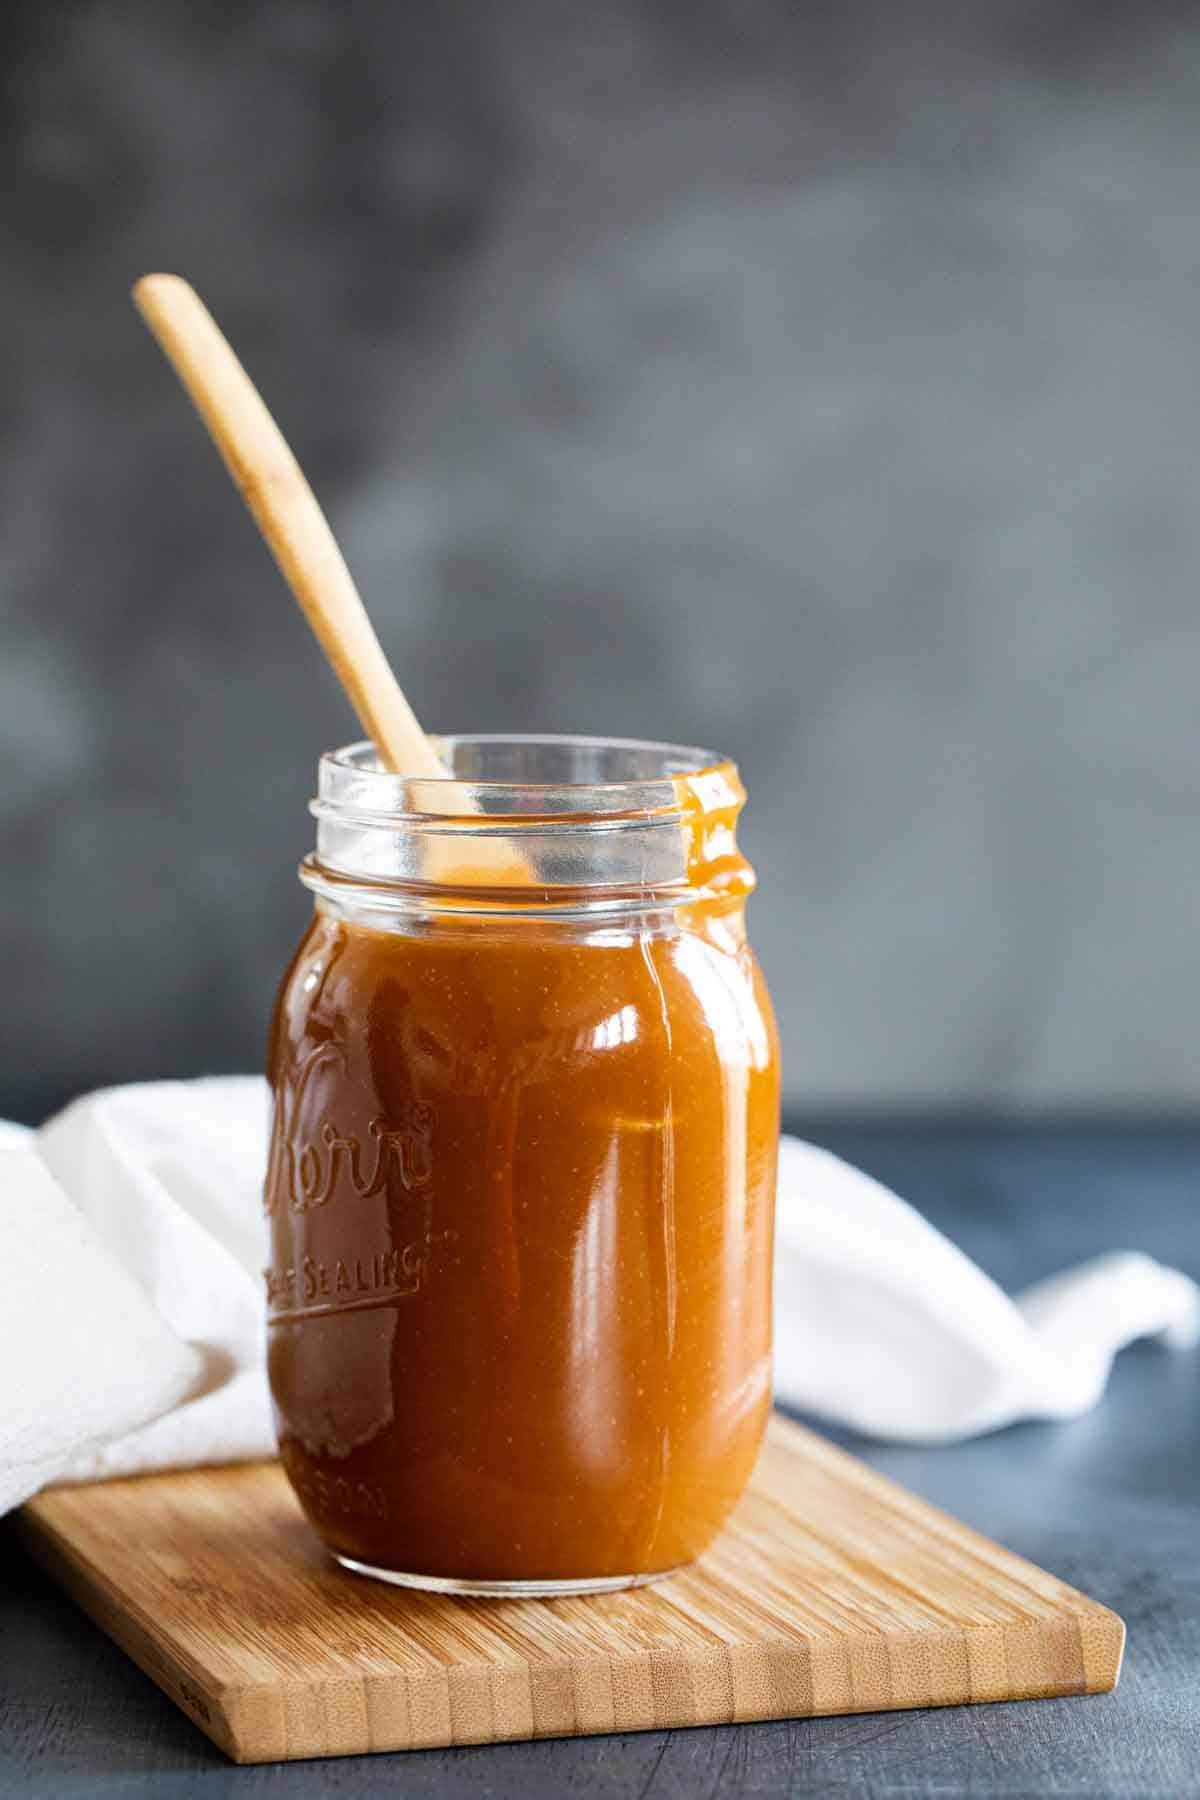 homemade caramel sauce in a jar sitting on a wooden board.